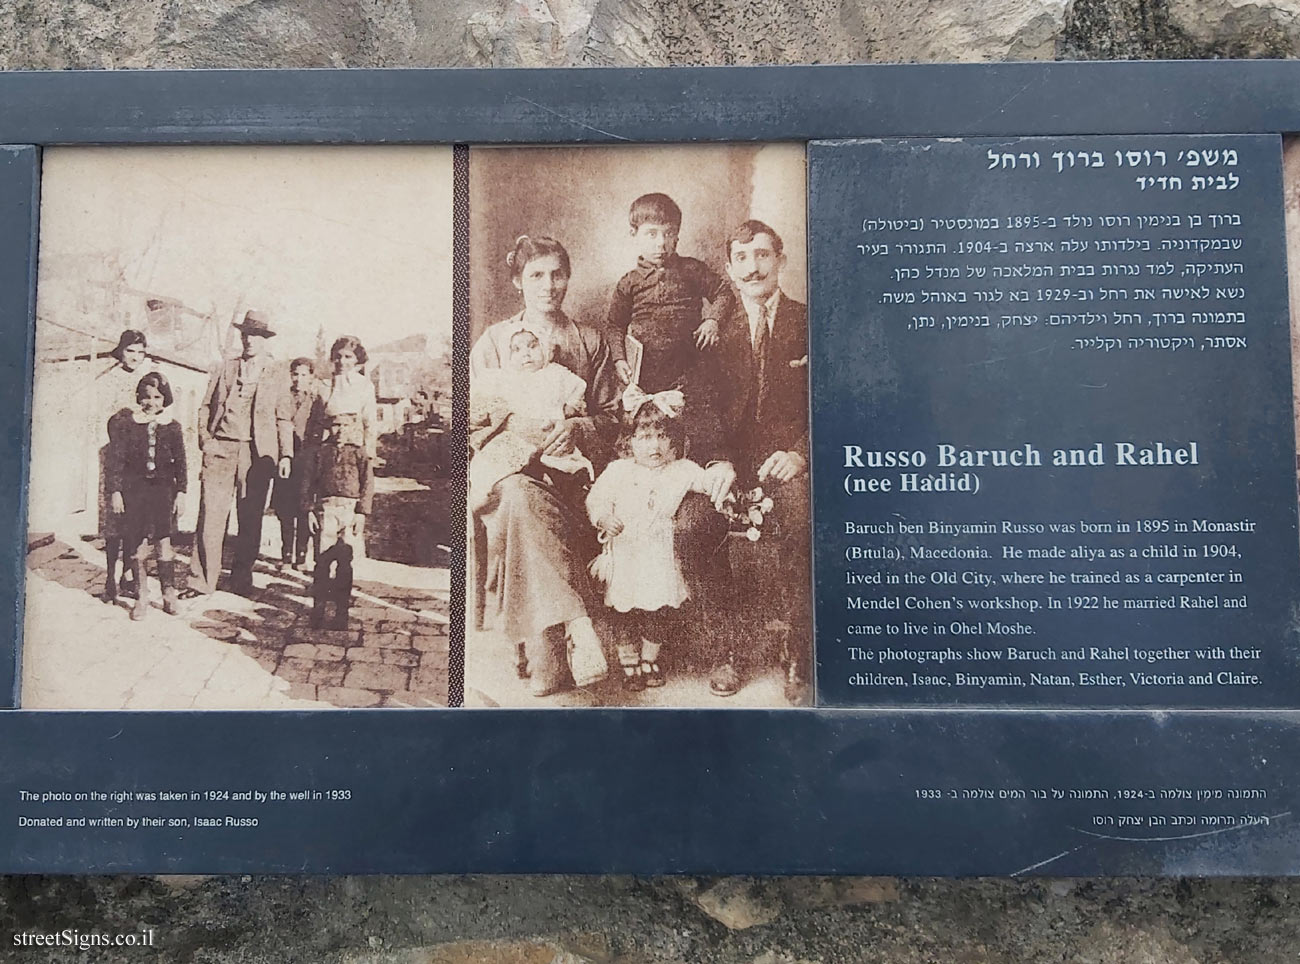 Jerusalem - Photograph in stone - Ohel Moshe - Russo Baruch and Rahel